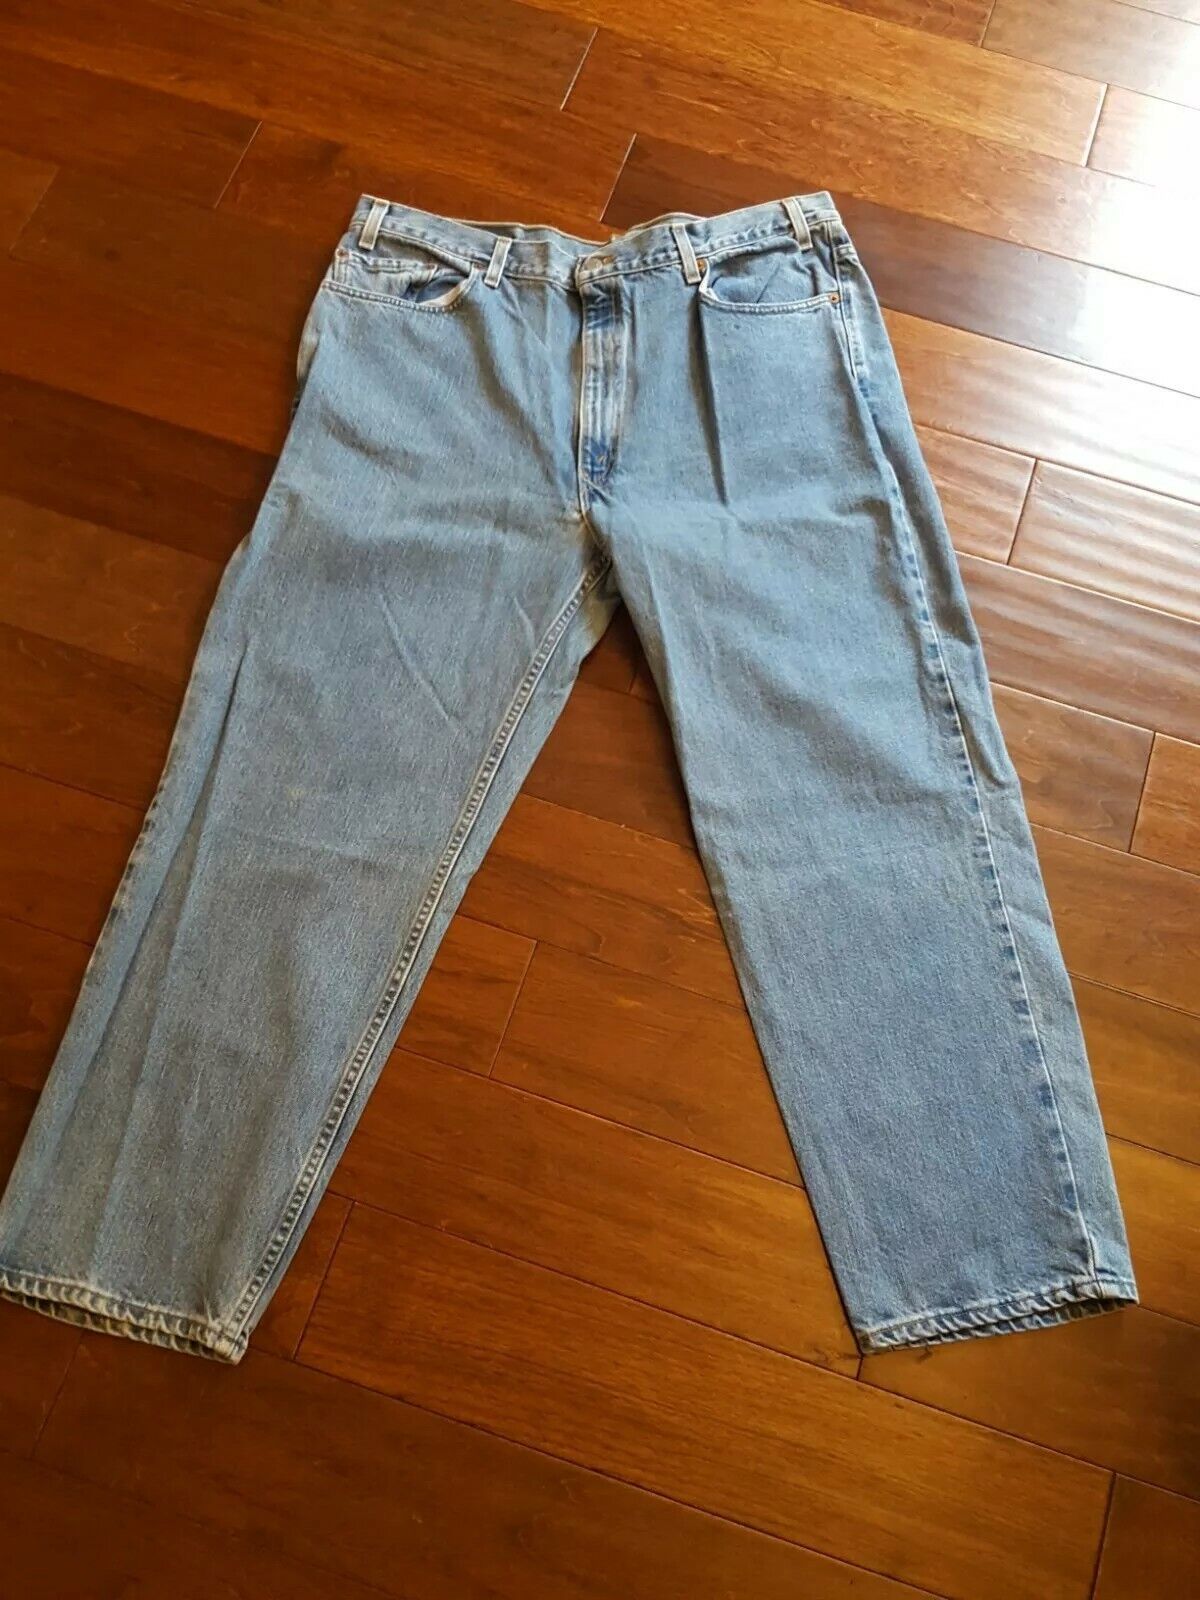 vtg usa made LEVI's 550 relaxed fit denim jeans 42 x 30 tag (40 x 28) | eBay